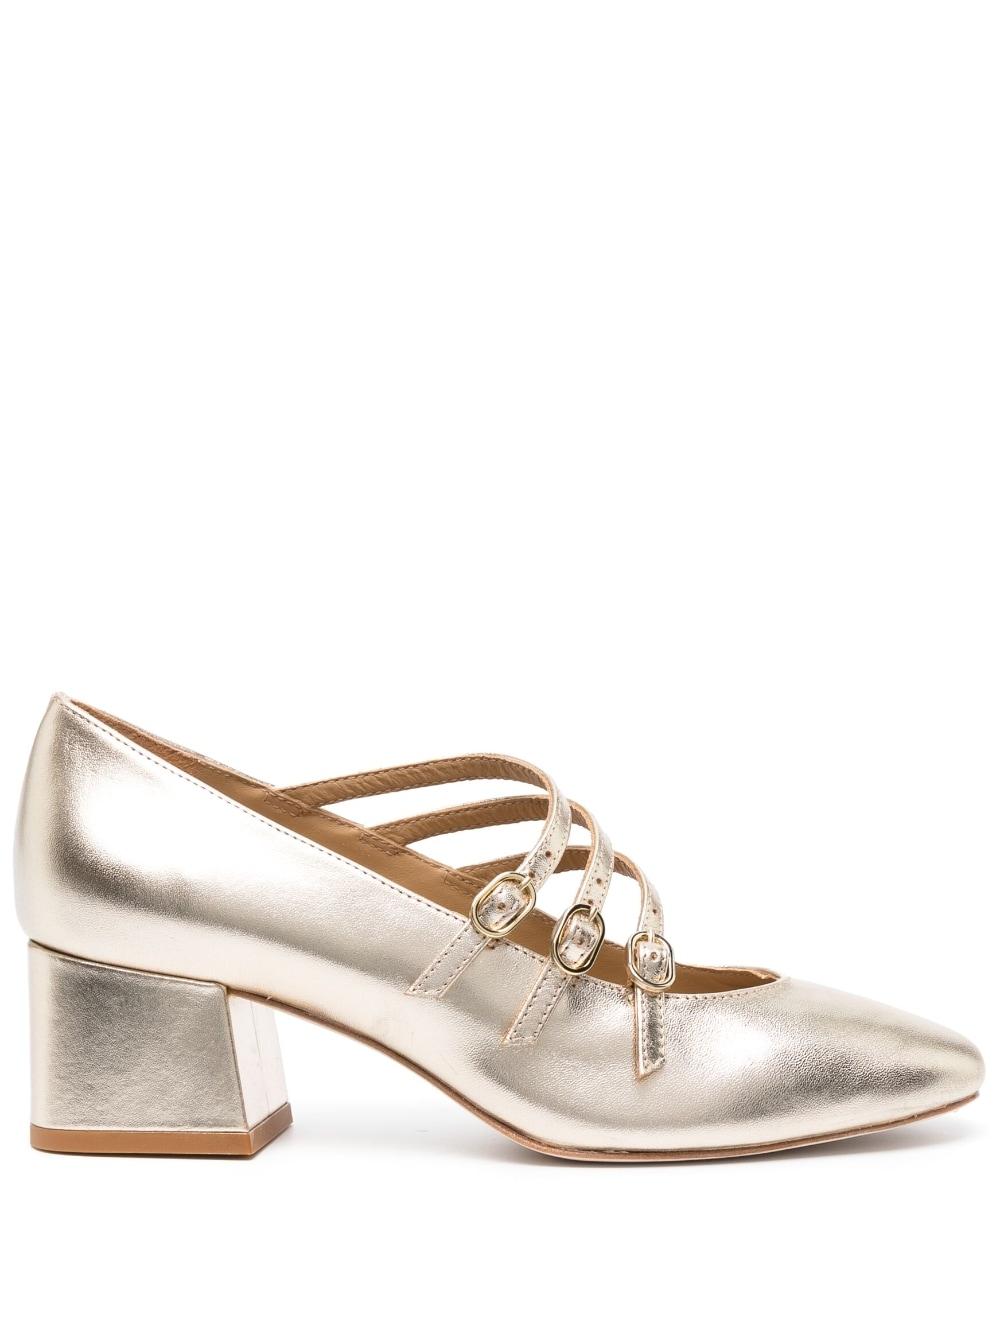 Reformation Mimi 50mm Leather Pumps in Natural | Lyst